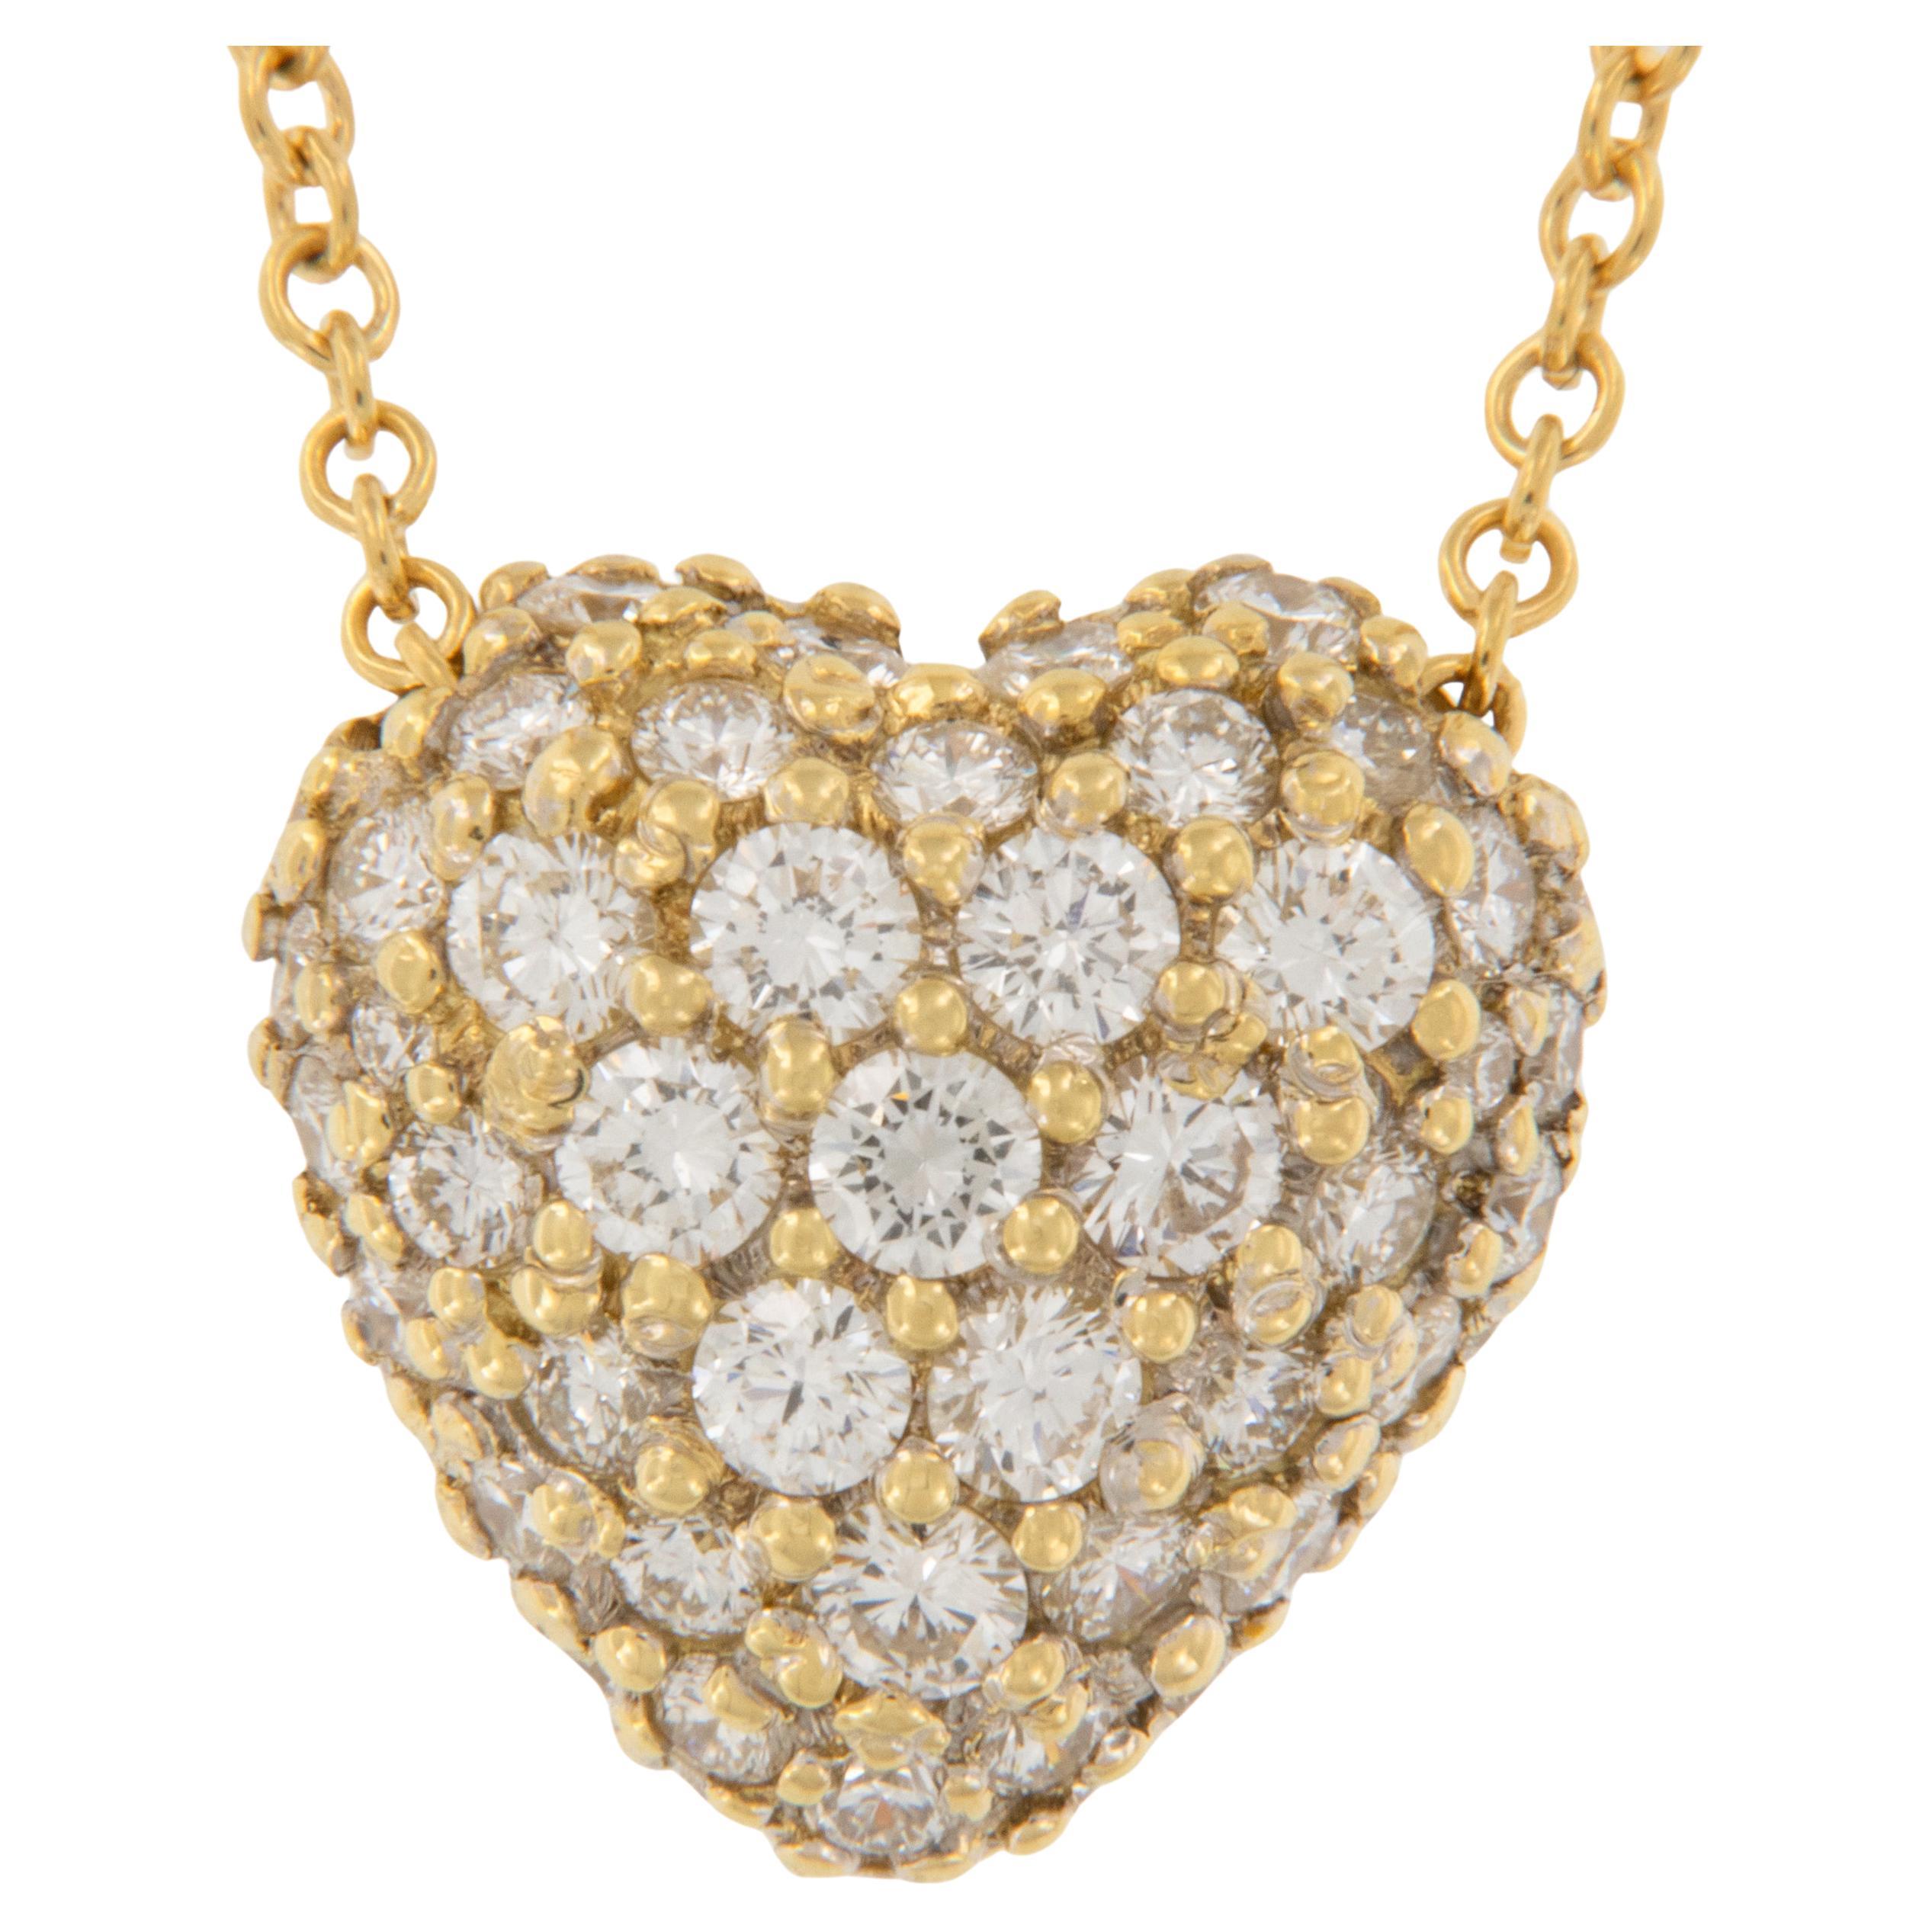 18 Karat Yellow Gold 1.50 Cttw Diamond Puffy Heart Necklace by Patrick Irla For Sale